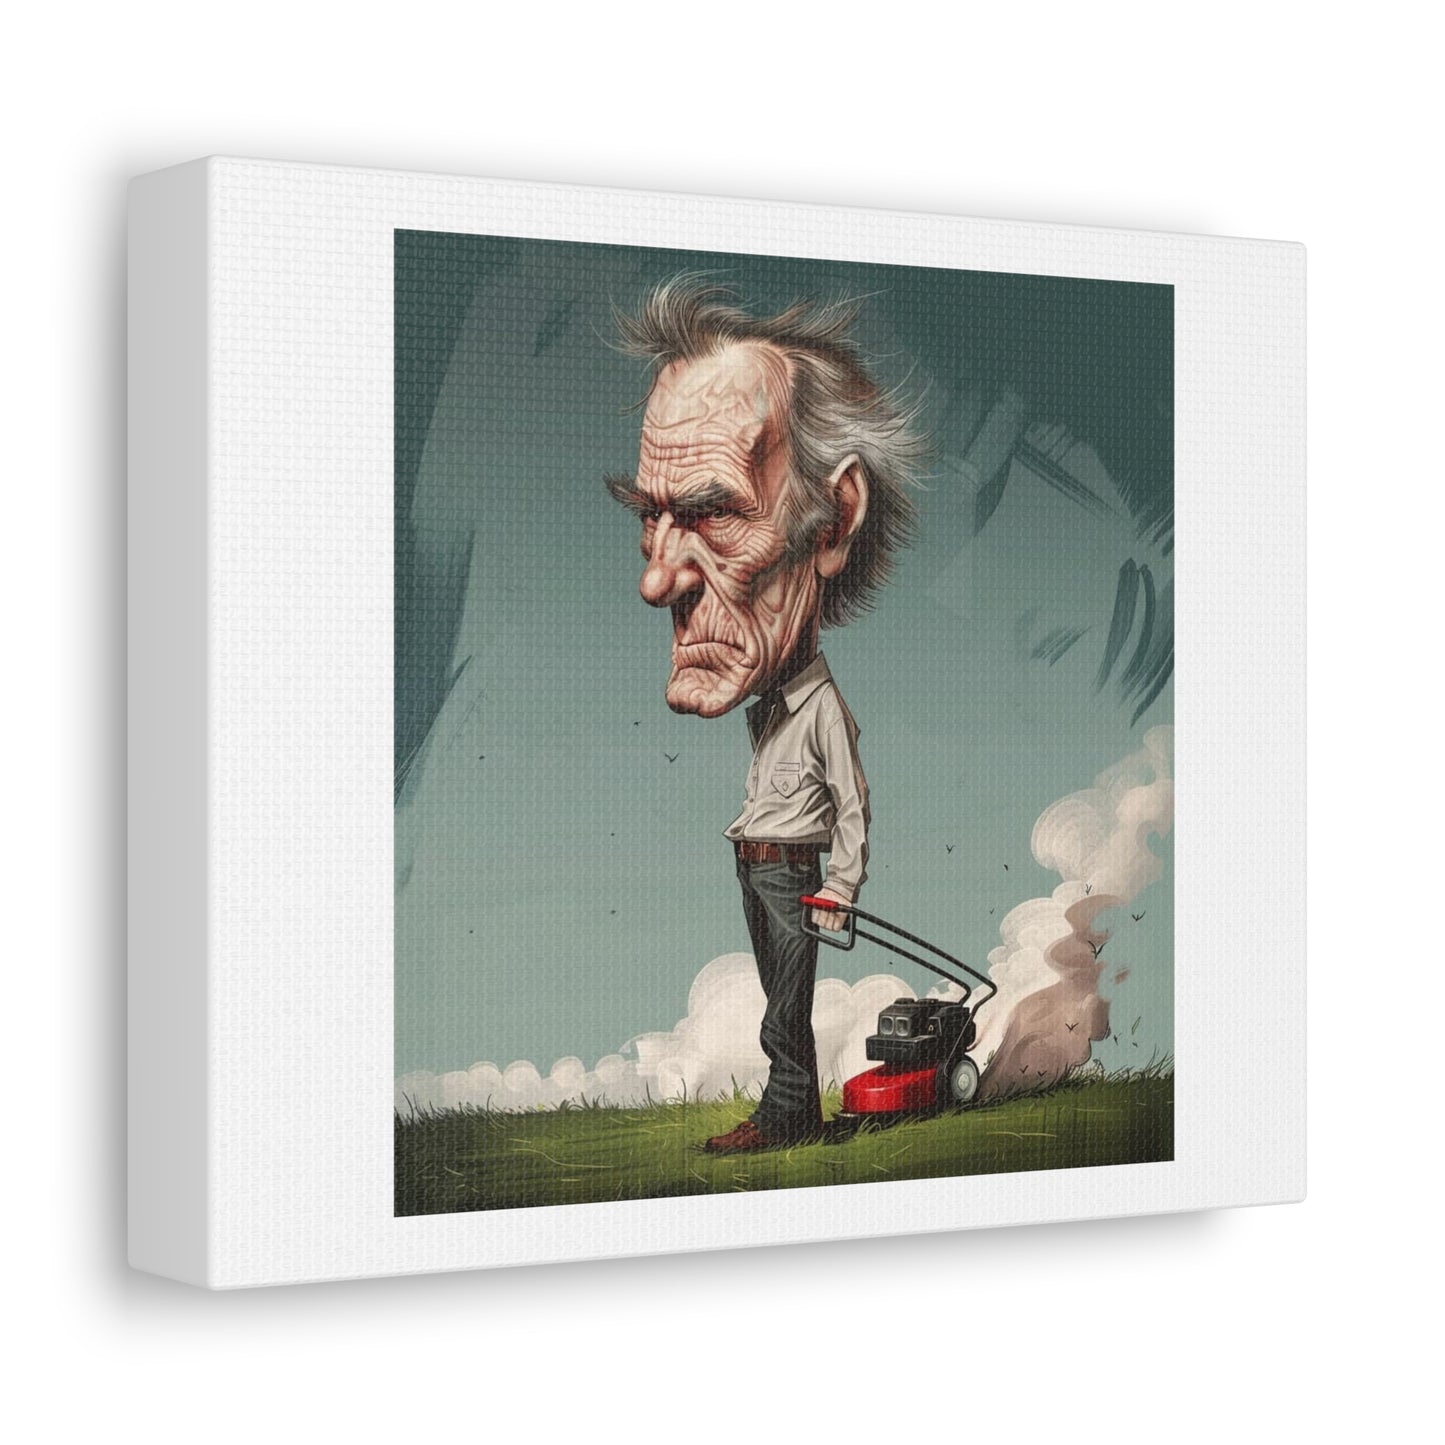 Get Off My Lawn! 'Designed by AI' Art Print on Canvas